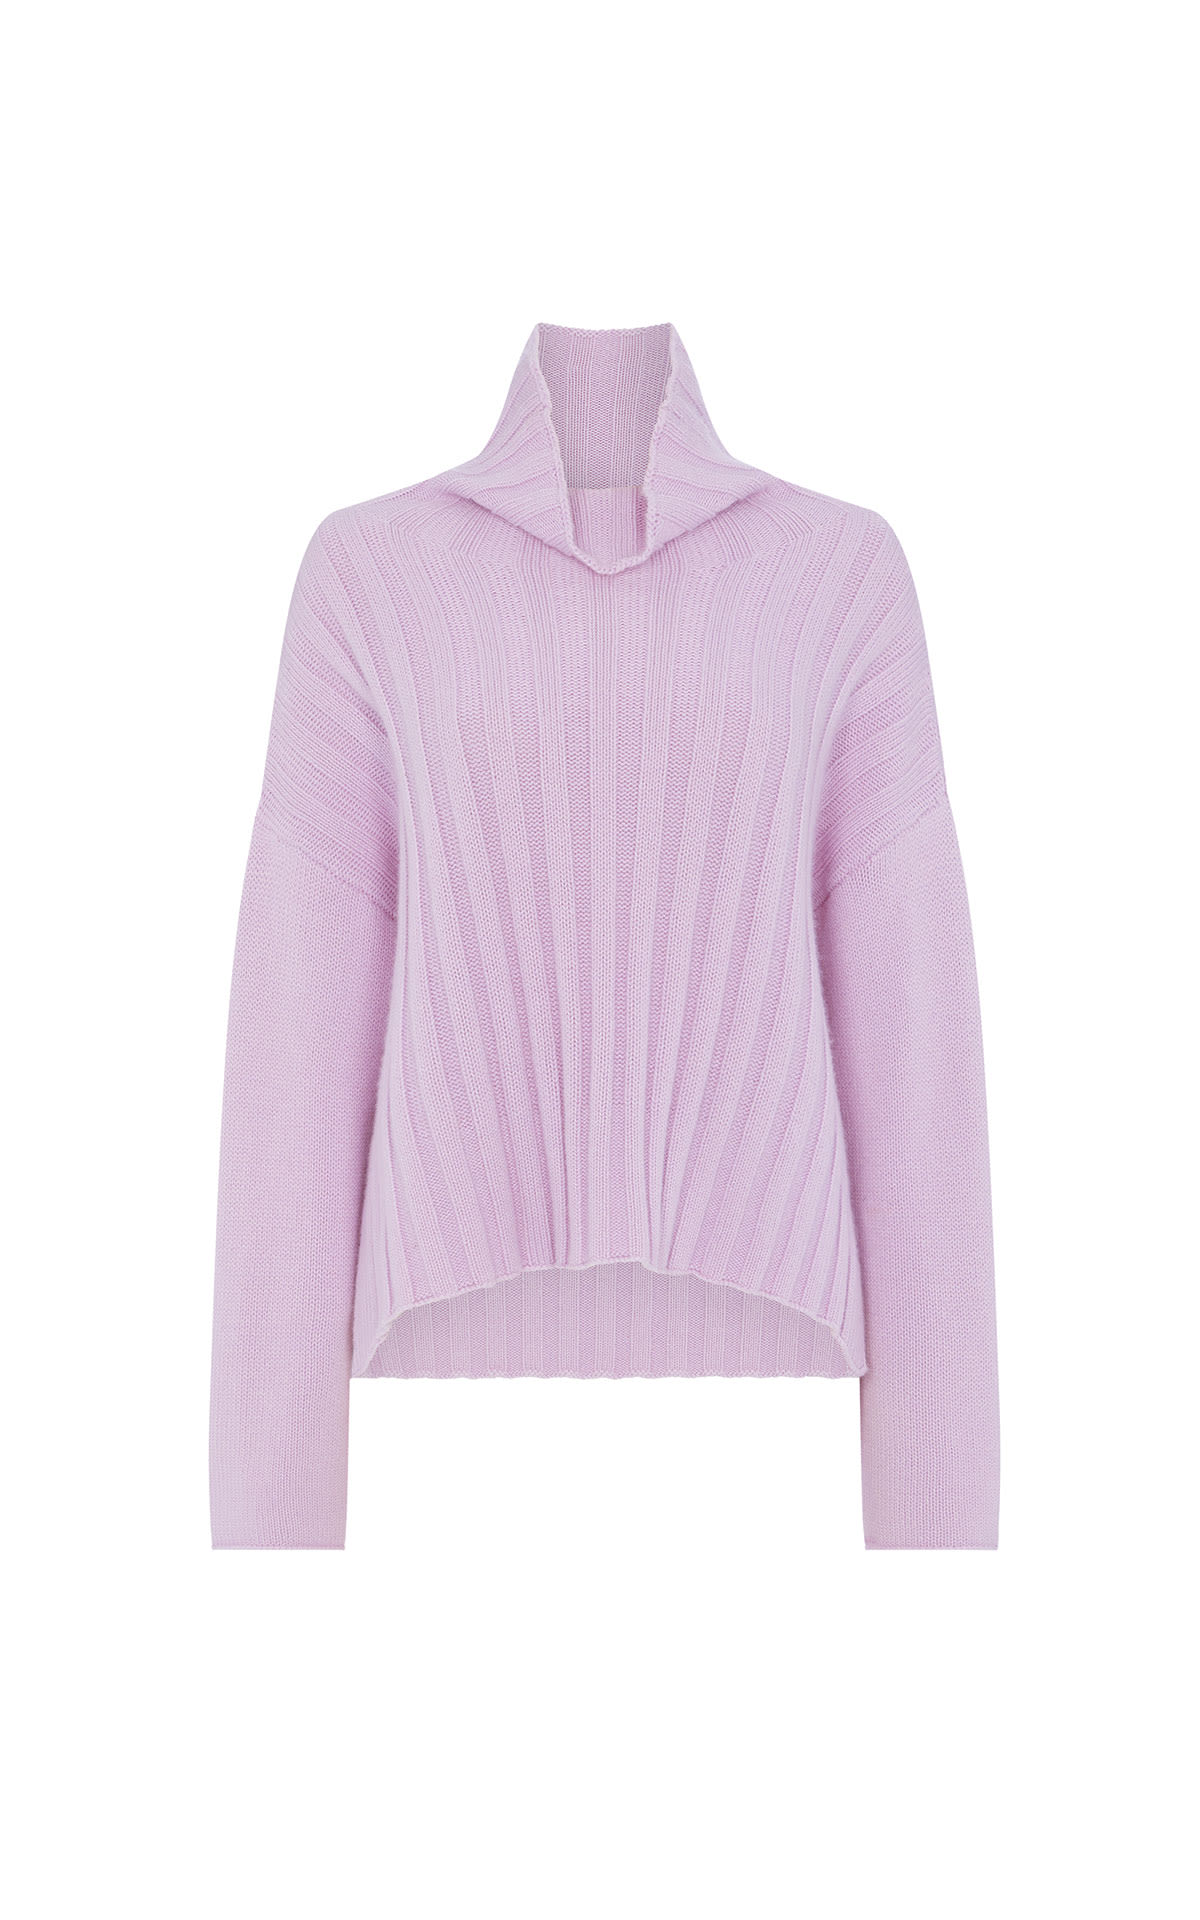 Bamford  Emilia knit lilac from Bicester Village